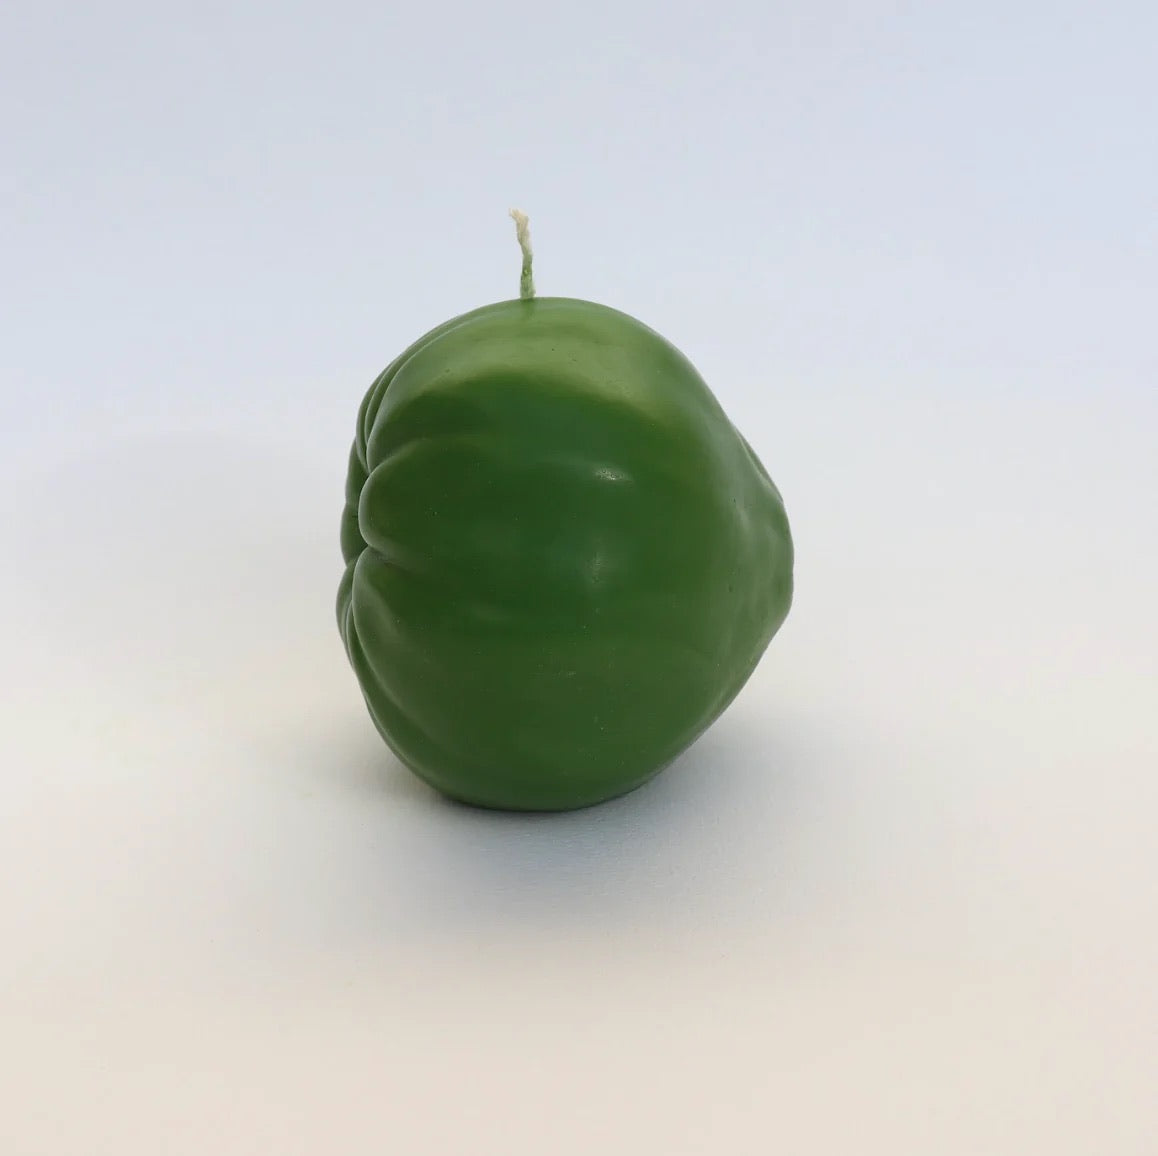 A Green Heirloom Tomato Candle – Large by Nonna&#39;s Grocer sitting on a white surface.